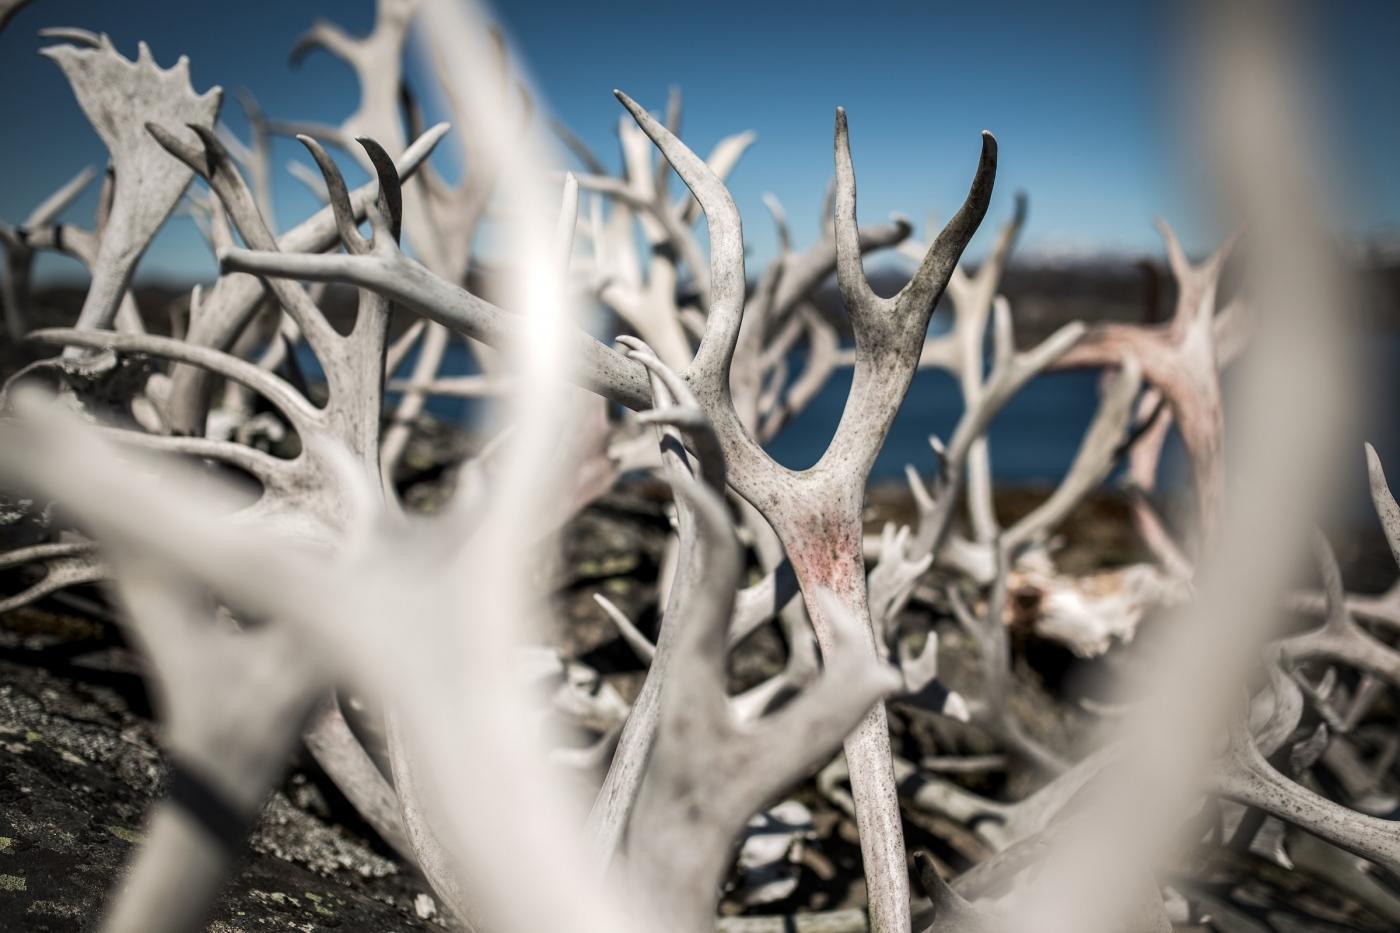 A collection of reindeer antlers outside a house in Qeqertarsuatsiaat south of Nuuk in Greenland. Photo by Mads Pihl - Visit Greenland